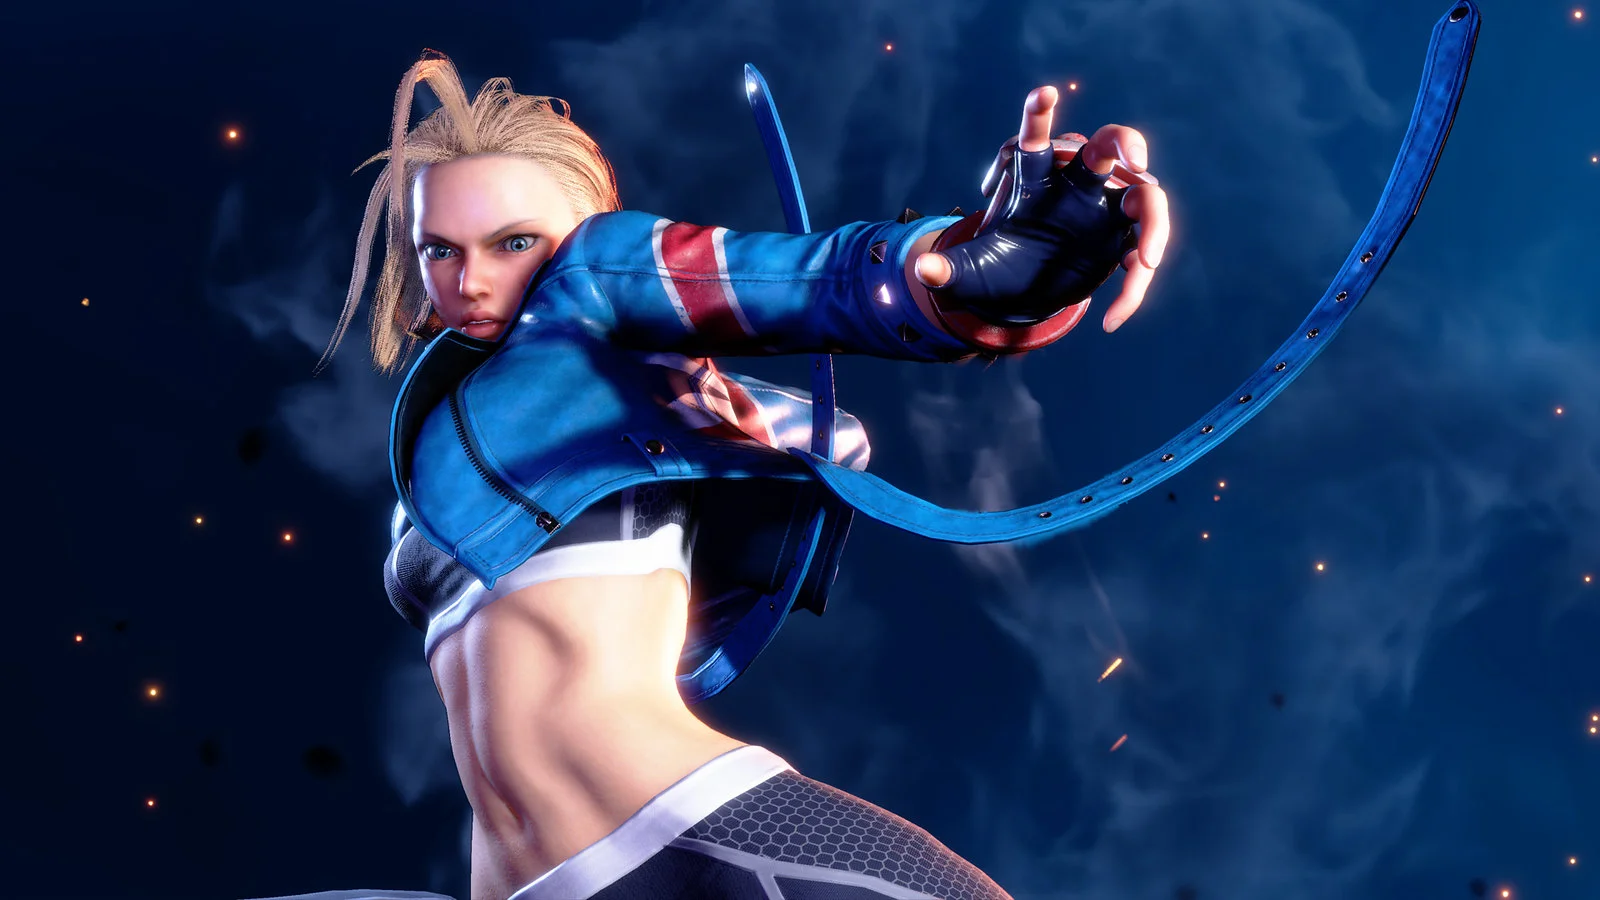 New characters and old friends. Street Fighter trailer introduced some of the characters